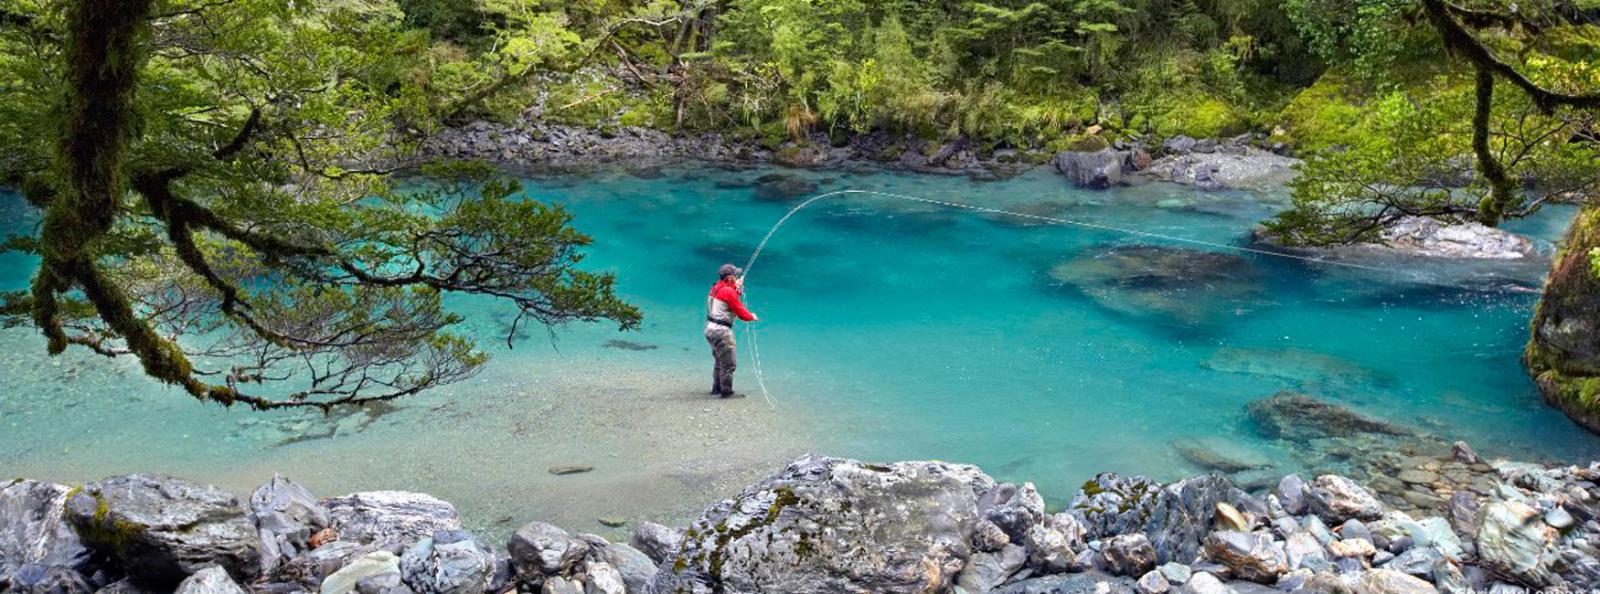 South Island of NZ Fly Fishing Itinerary